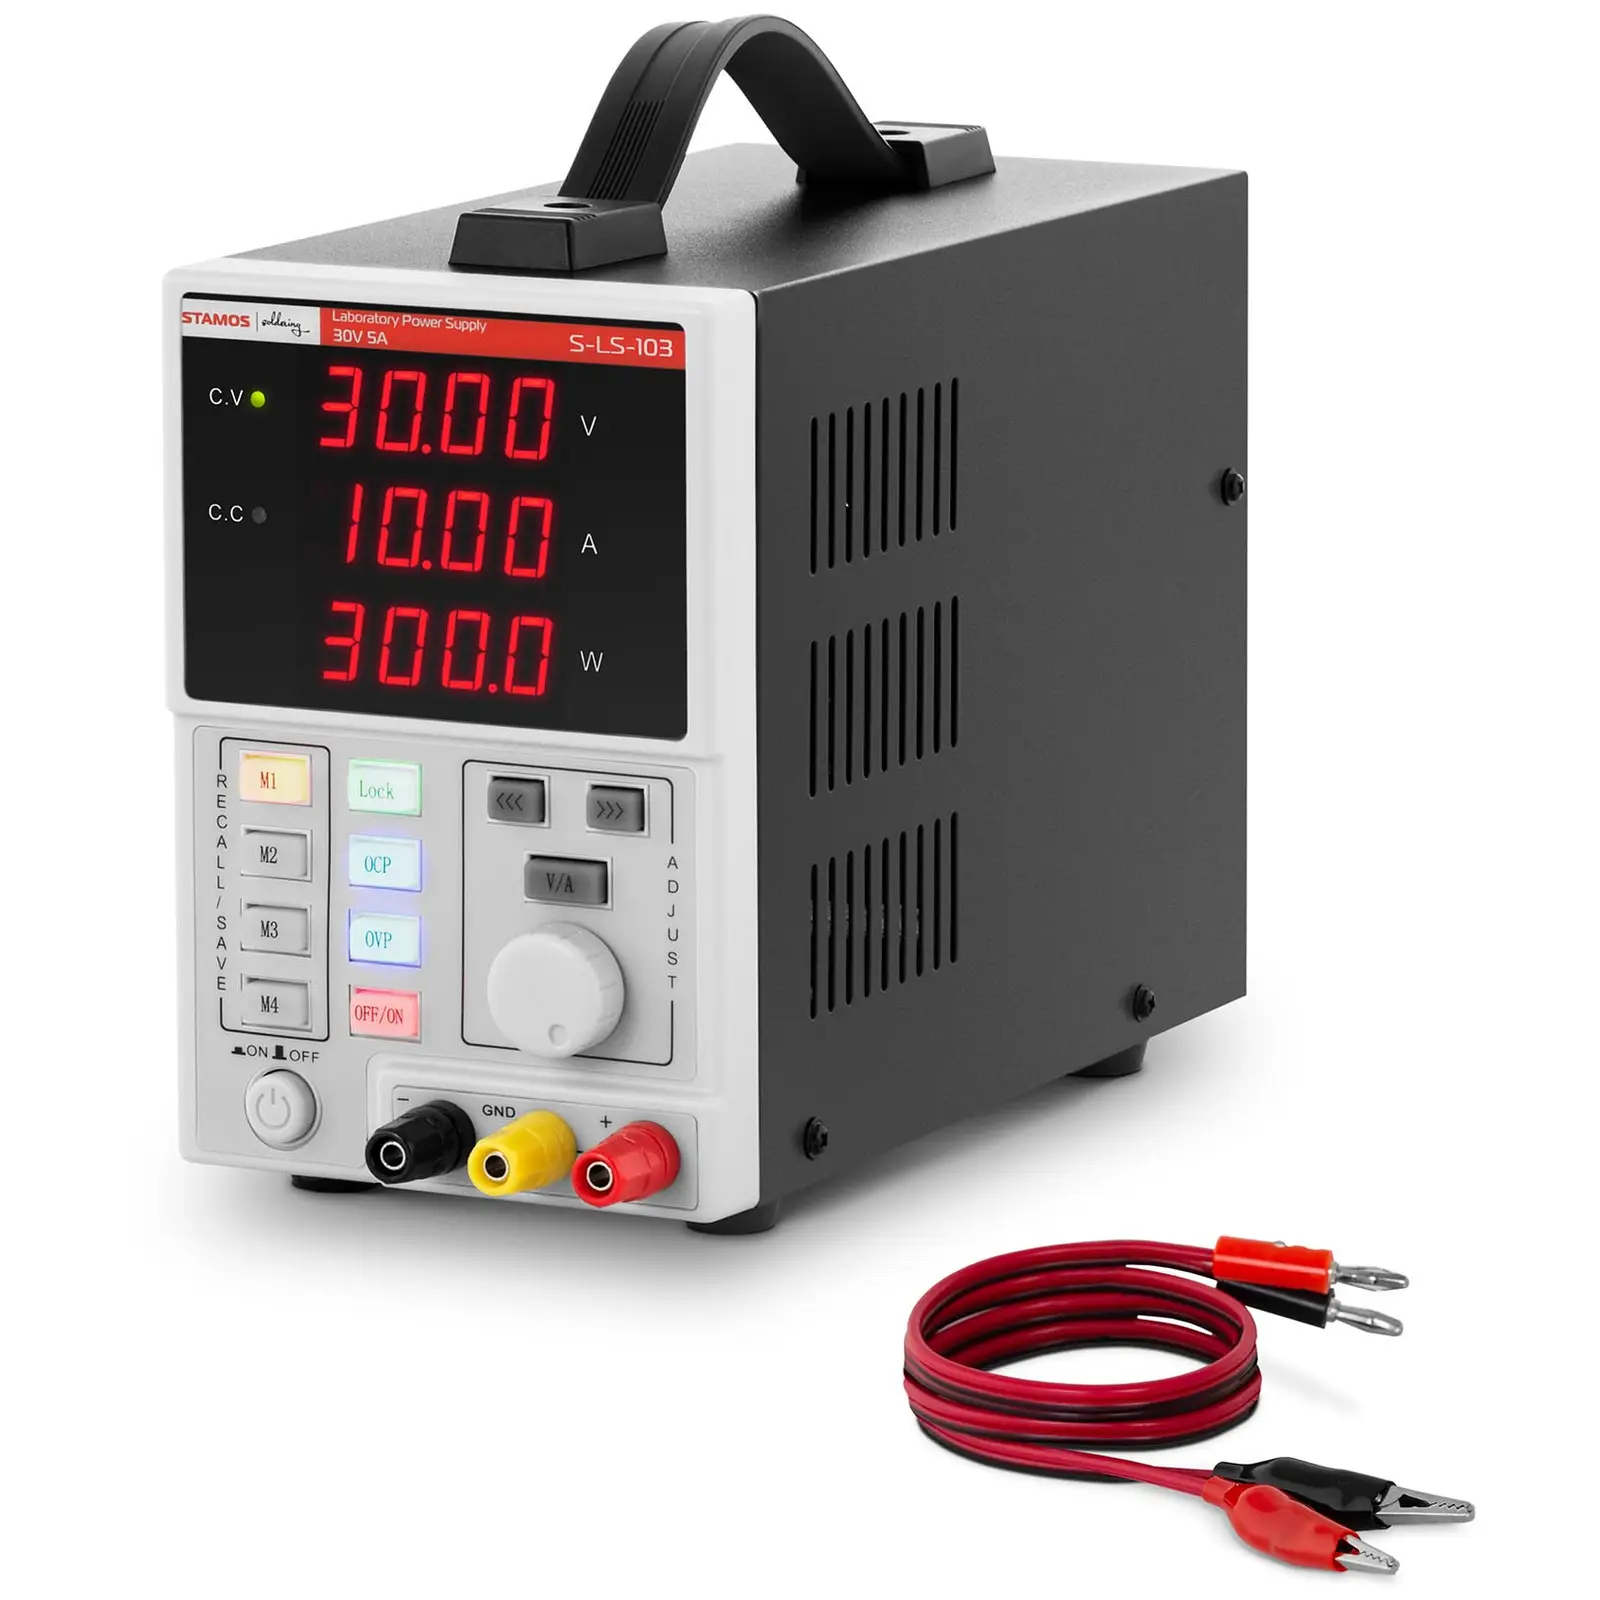 Bench Power Supply - 0 - 30 V - 0 - 10 A DC - 300 W - 4 memory spaces - 4-digit LED display